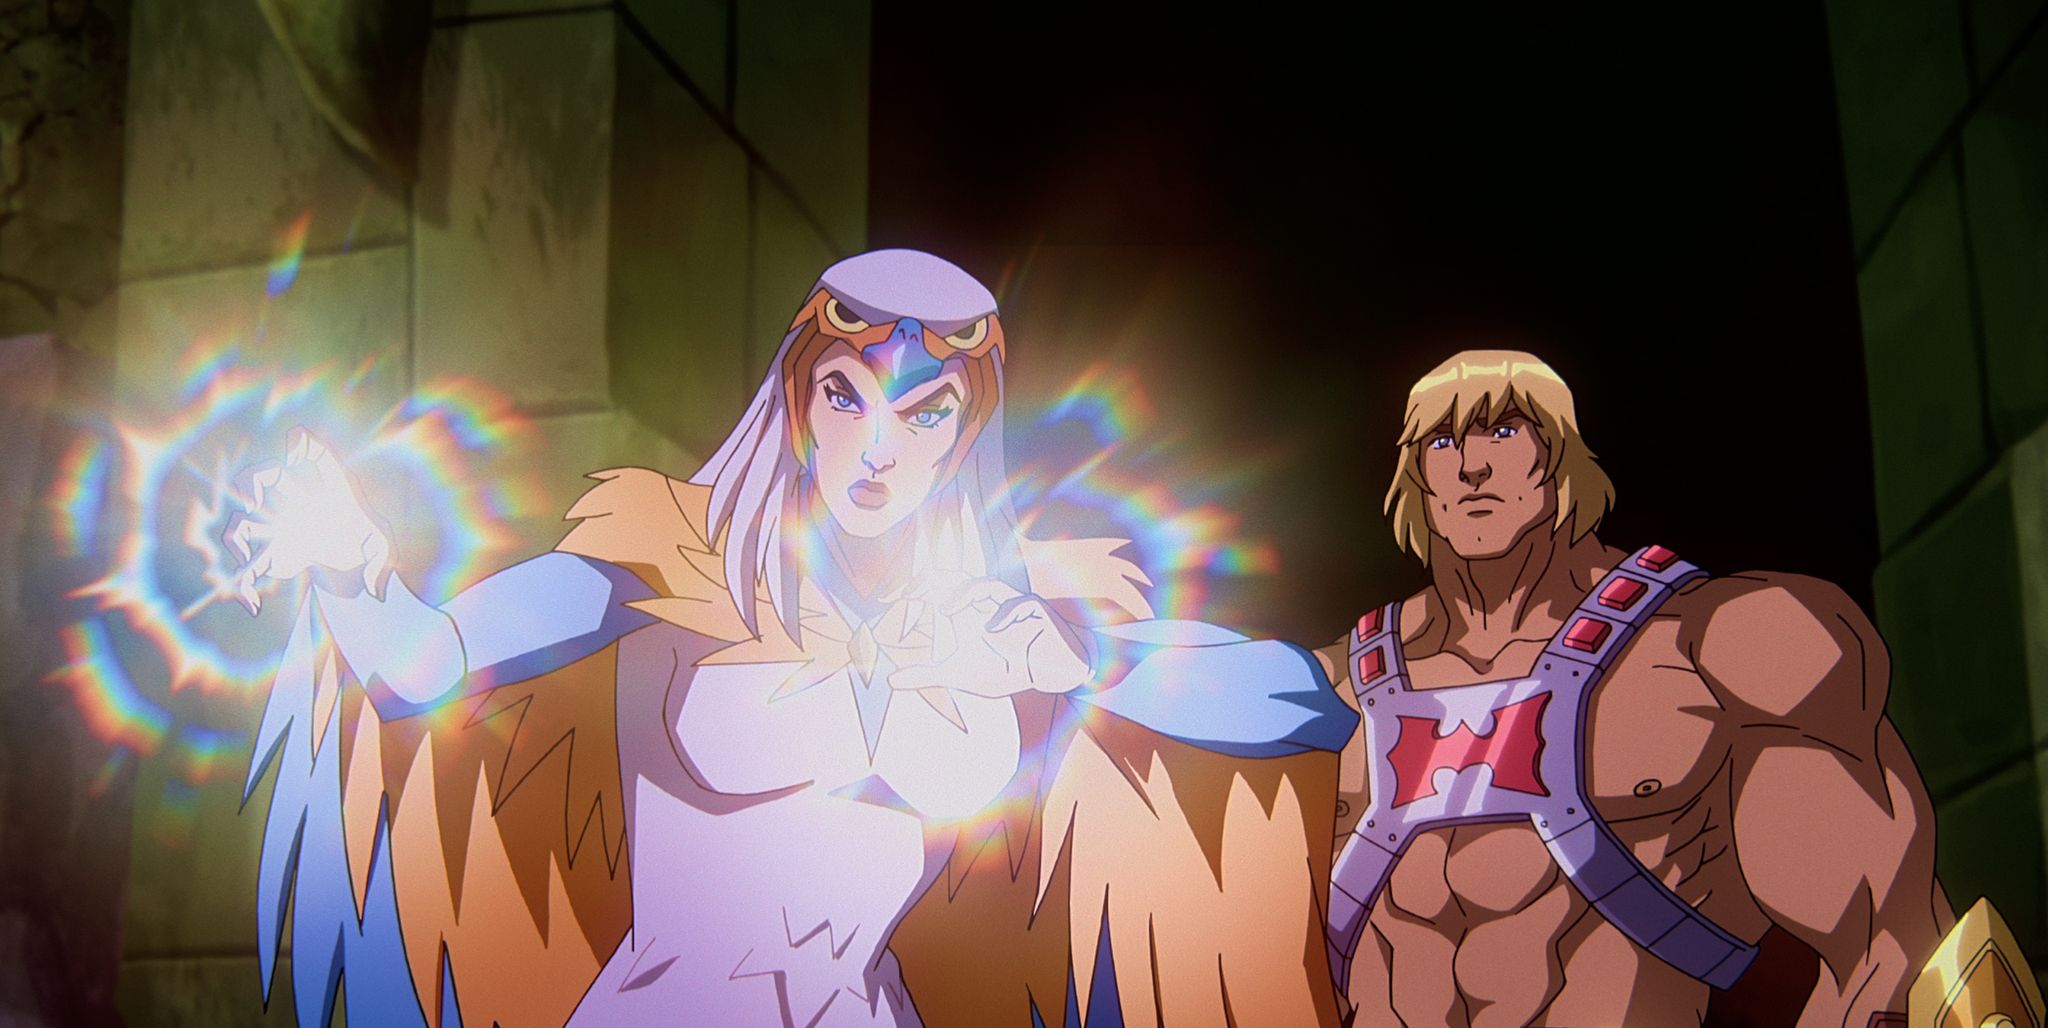 masters of the universe revelation l to r susan eisenberg as sorceress and chris wood as he man in episode 101 of masters of the universe revelation cr courtesy of netflix © 2021